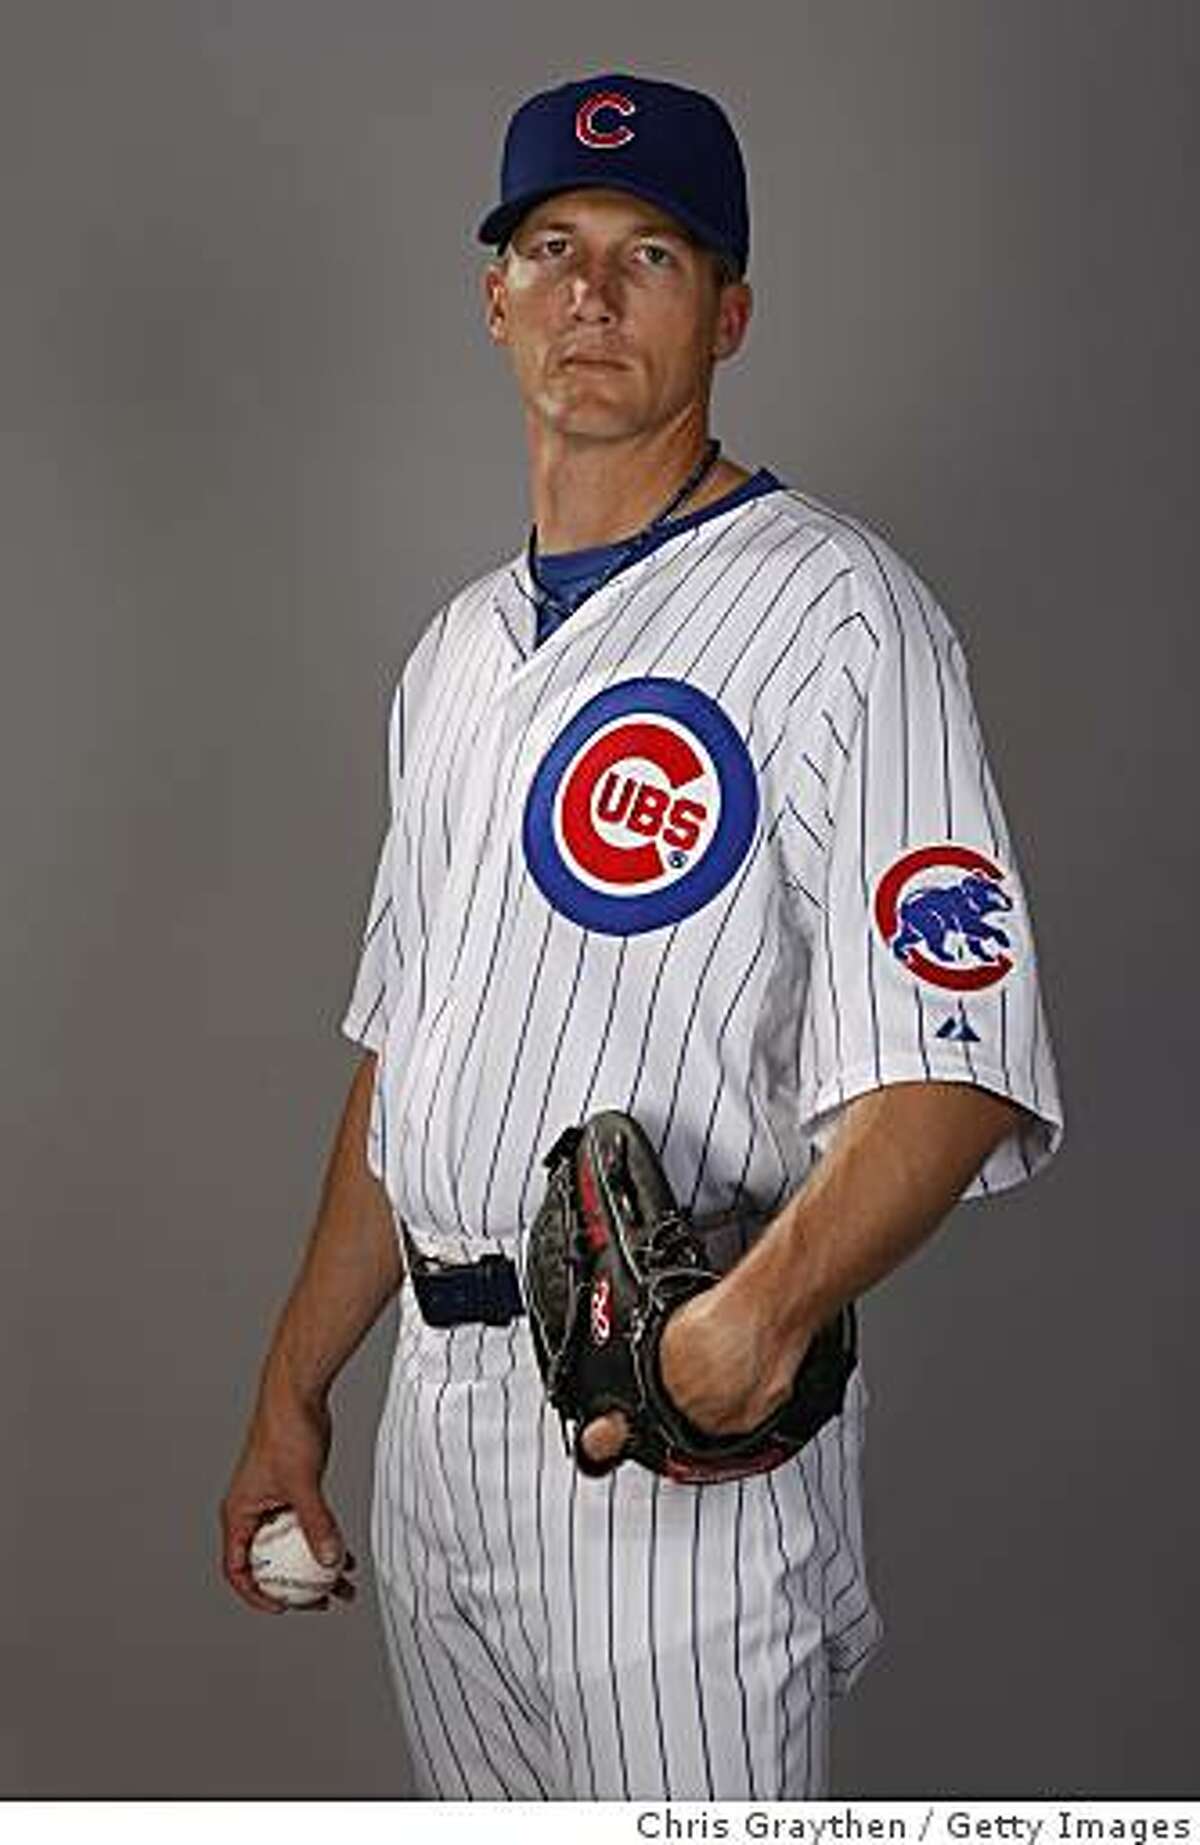 MESA, AZ - FEBRUARY 25: Bob Howry #62 of the Chicago Cubs poses for a photo during Spring Training Photo Day on February 25, 2008 in Mesa, Arizona. (Photo by Chris Graythen/Getty Images)